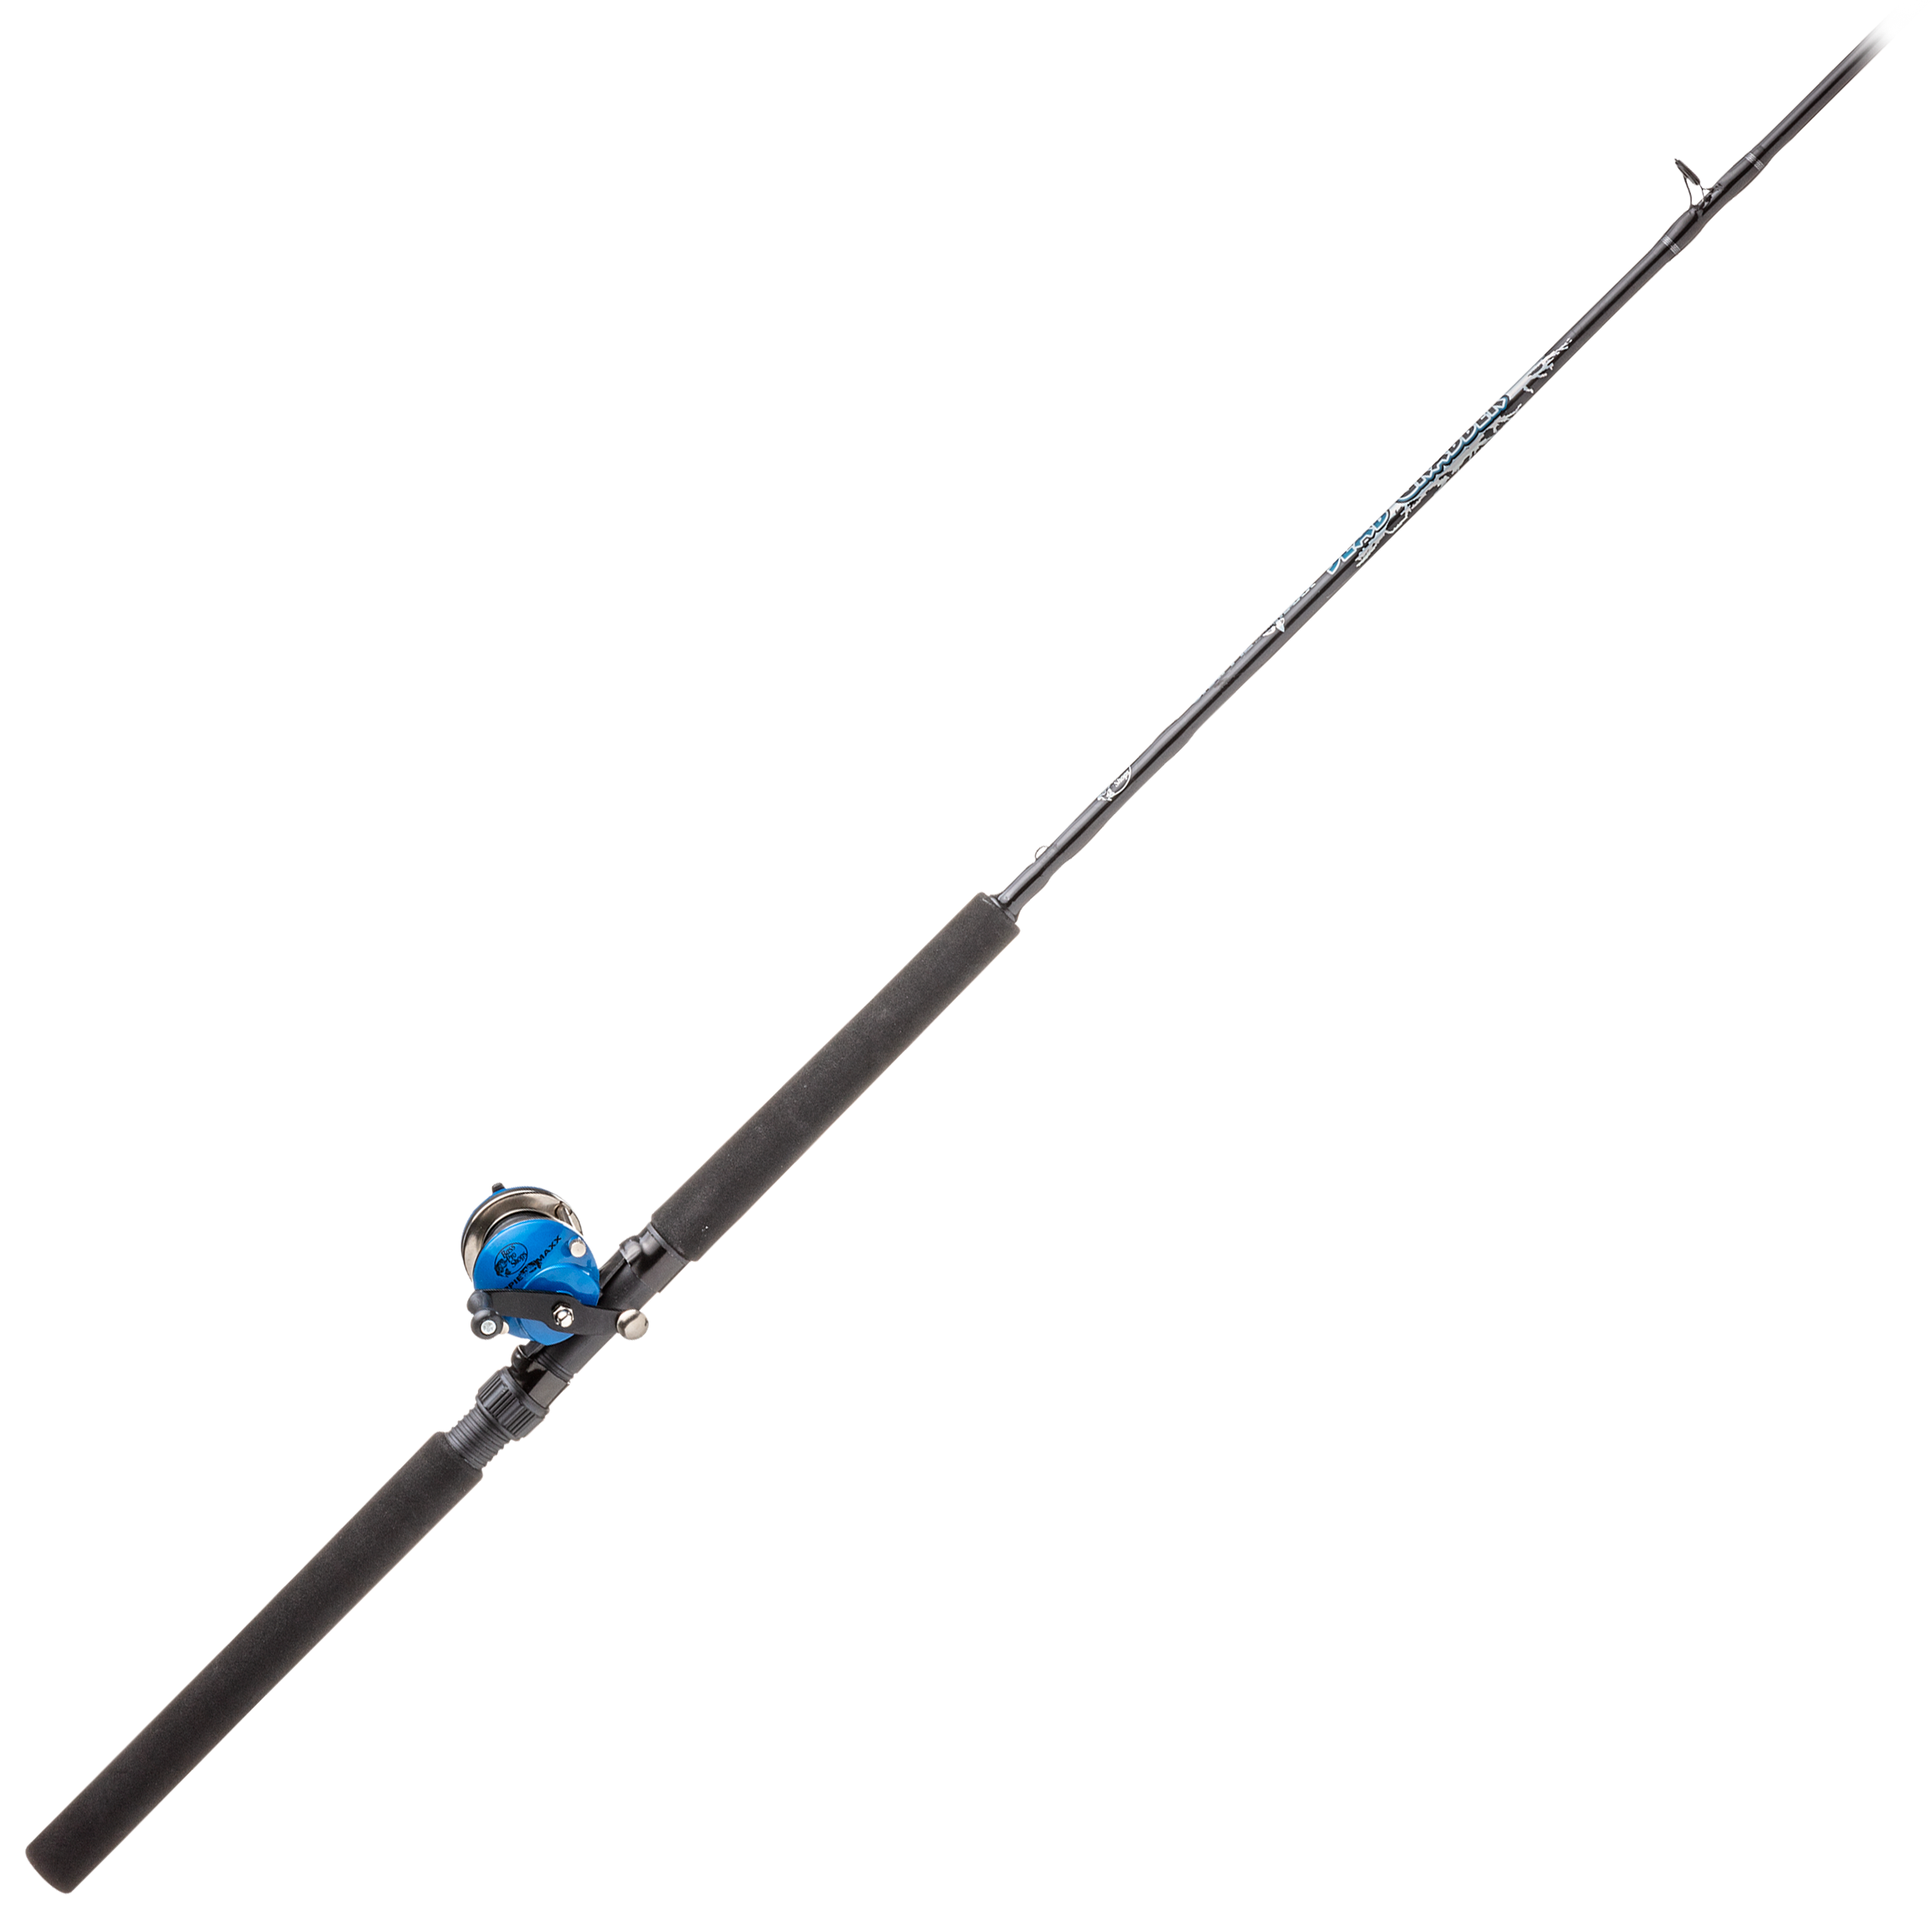 Bass Pro Shops Crappie Maxx Slab Grabber Rod and Reel Combo